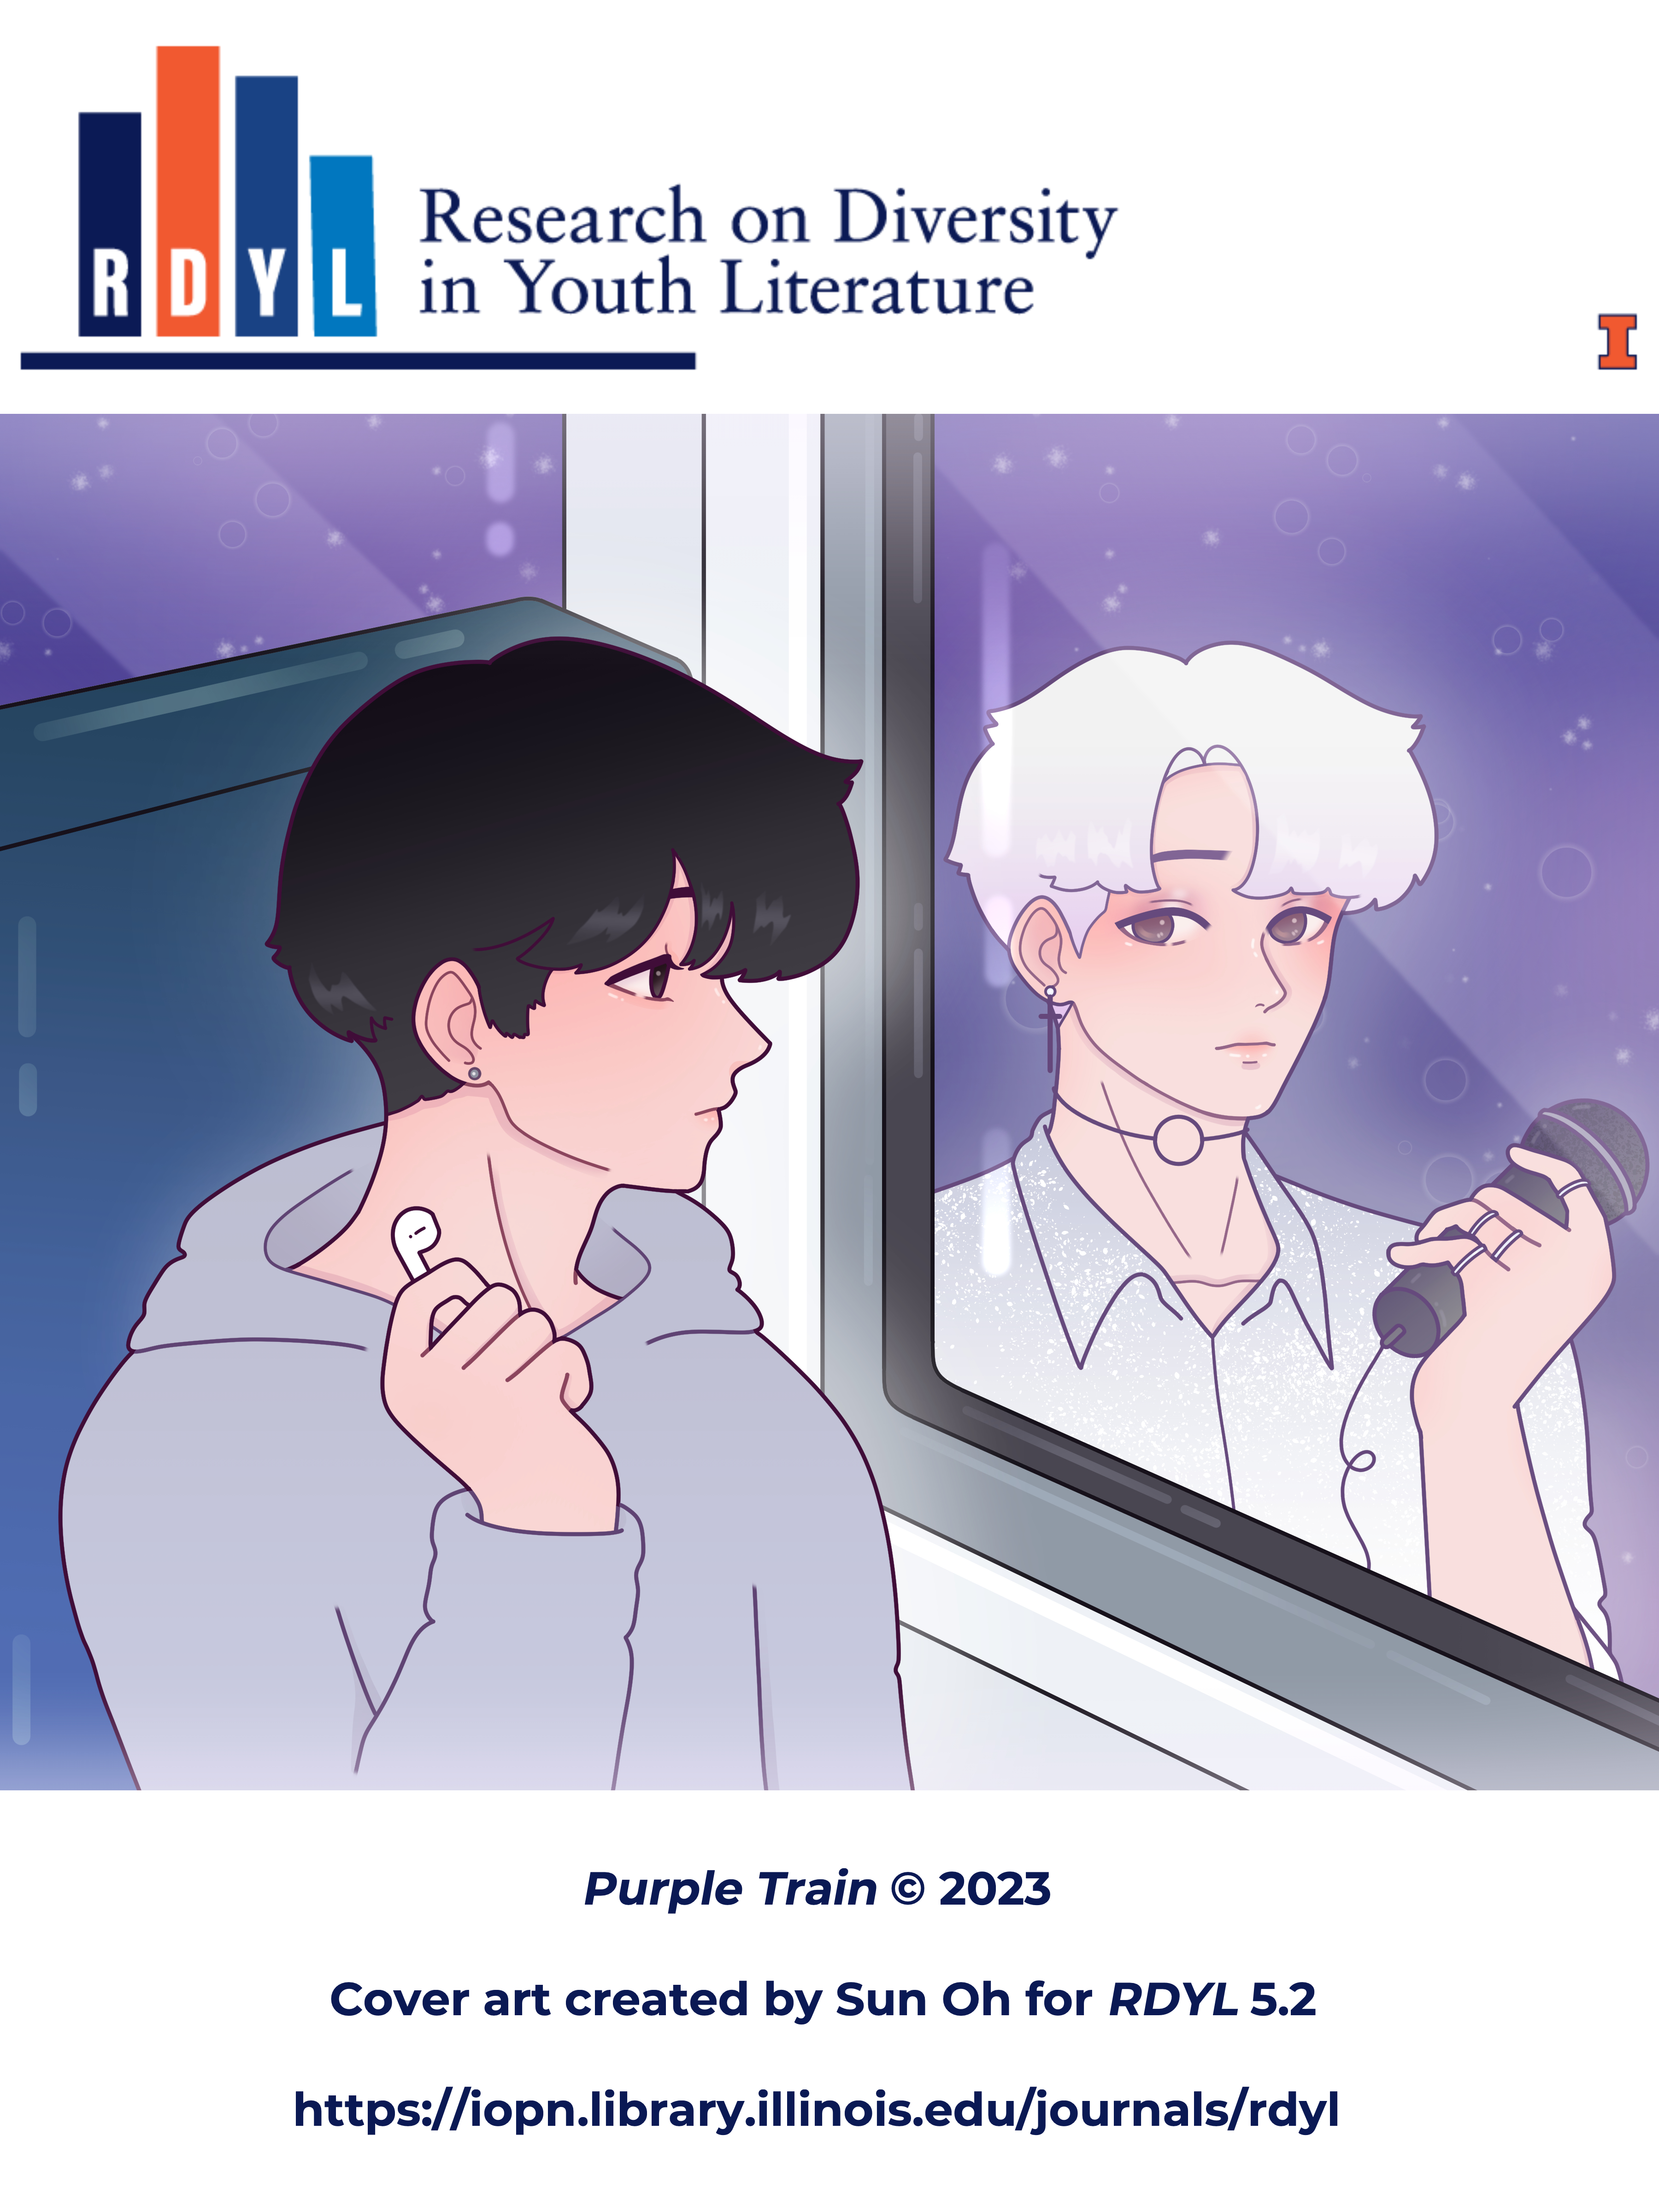 Young teen observes their K-pop reflection while riding a train.